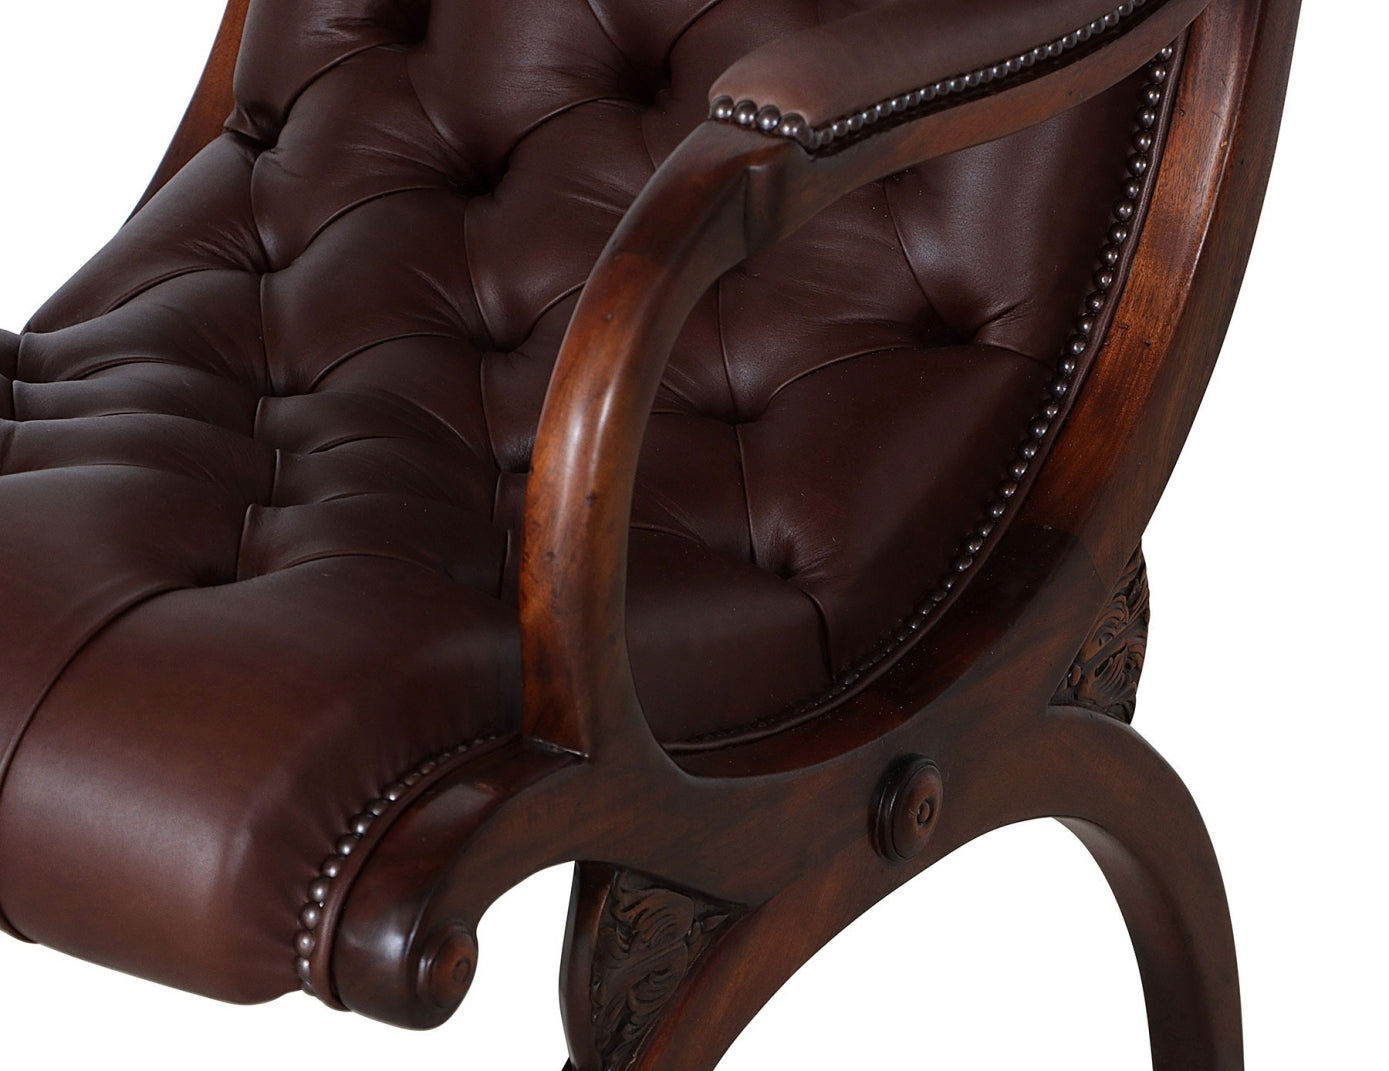 Classic slipper arm chair in chocolate brown leather